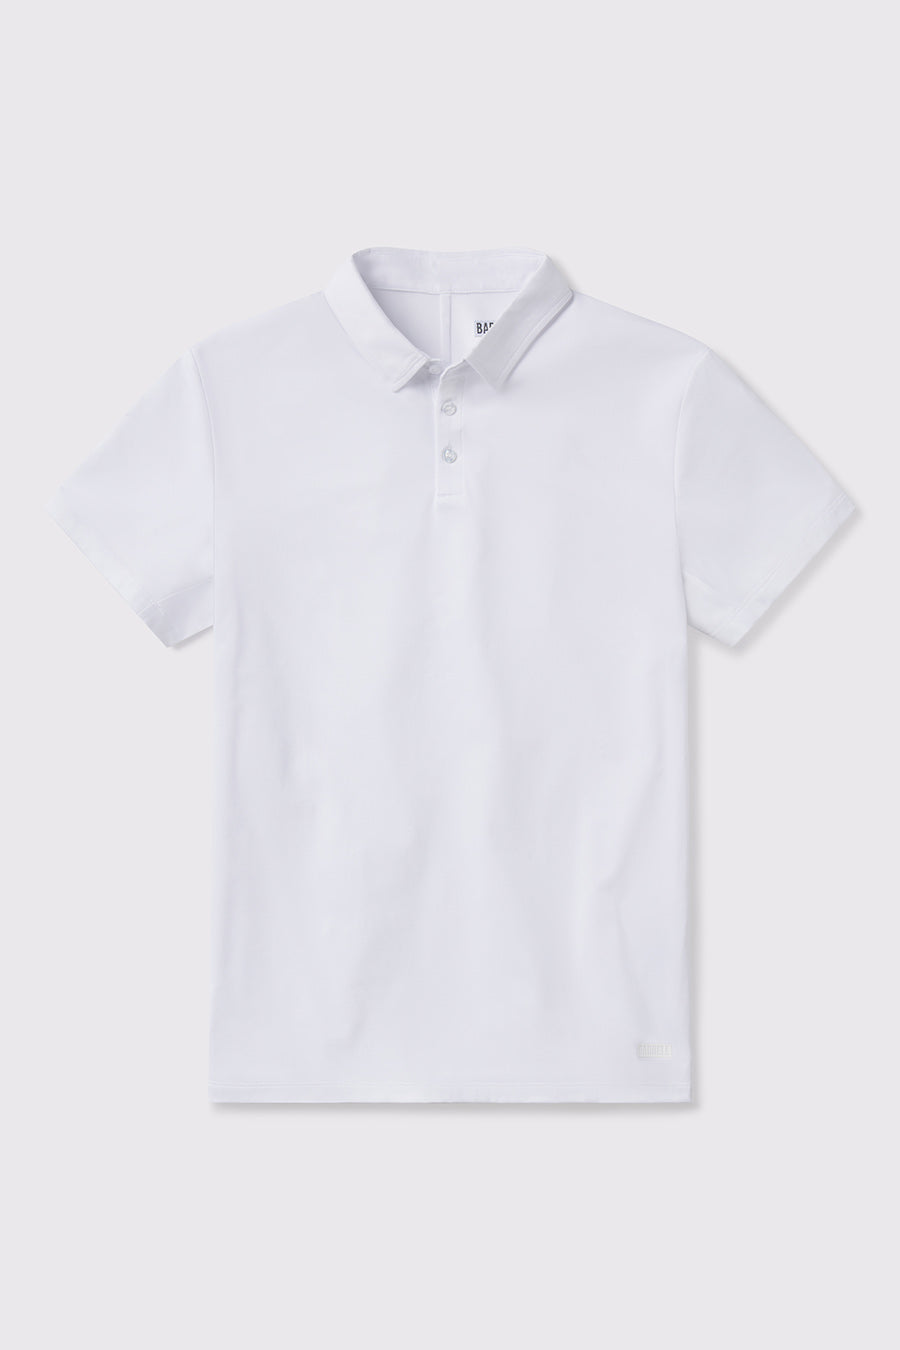 Havok Polo -White - photo from front flat lay #color_white